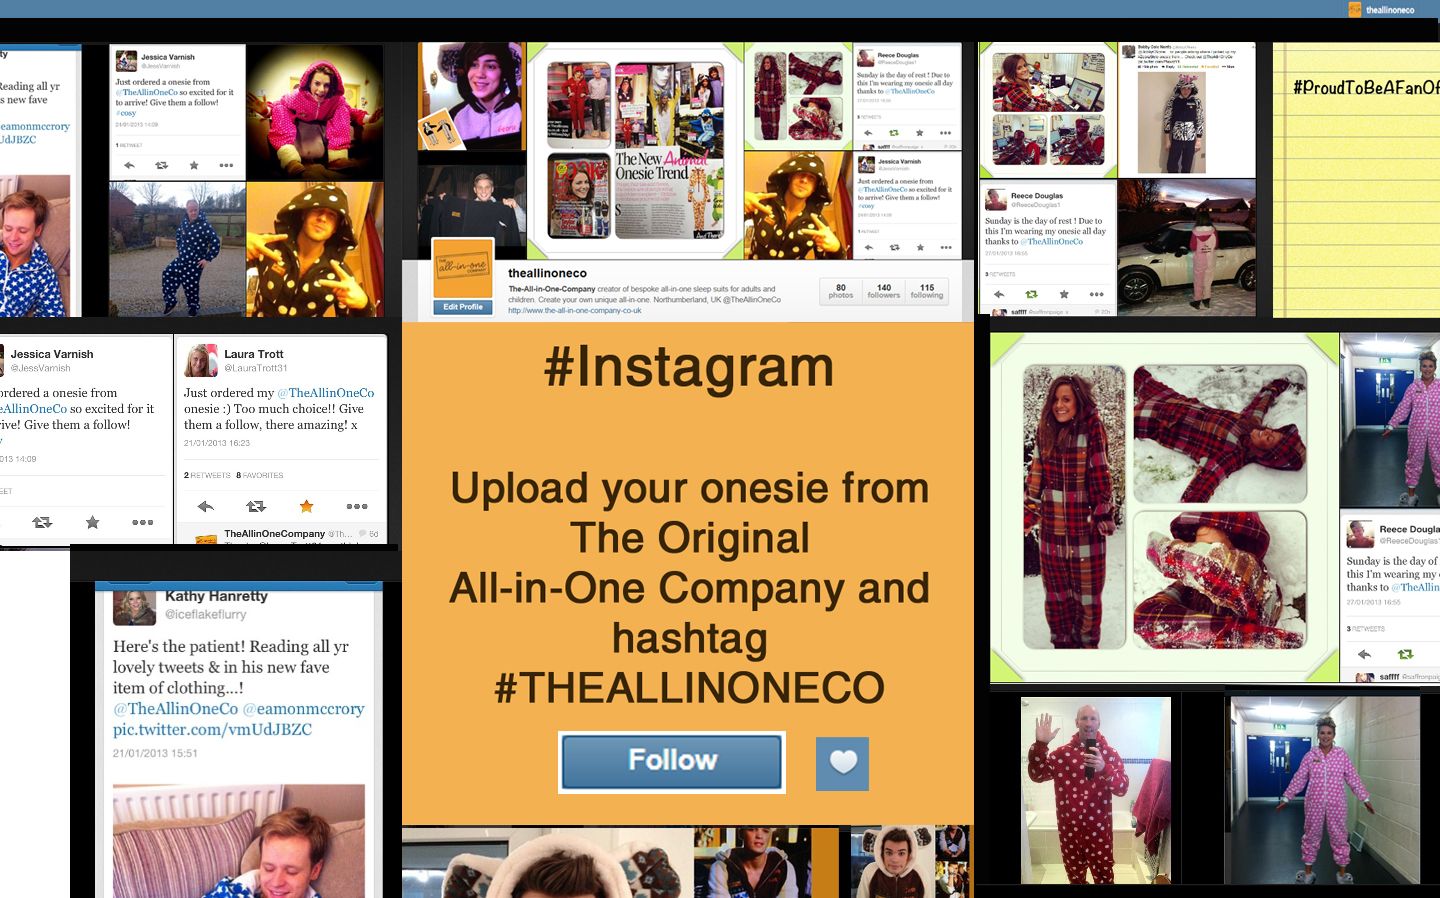 Onesie Love - Follow The All-in-One Company on Instagram